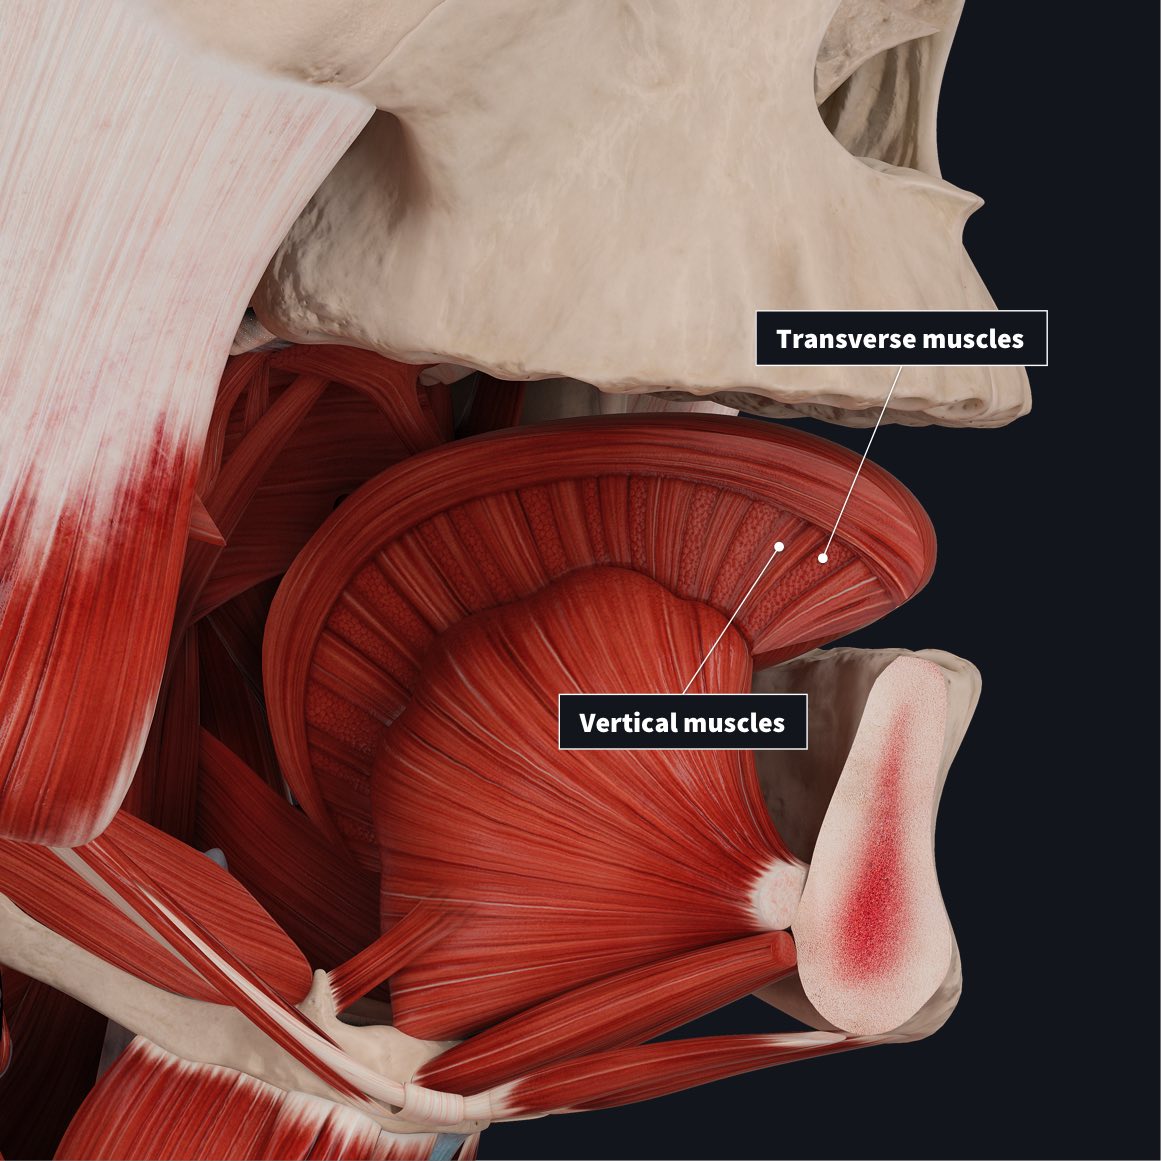 Intrinsic tongue muscles with Transverse muscles and Vertical muscles labelled